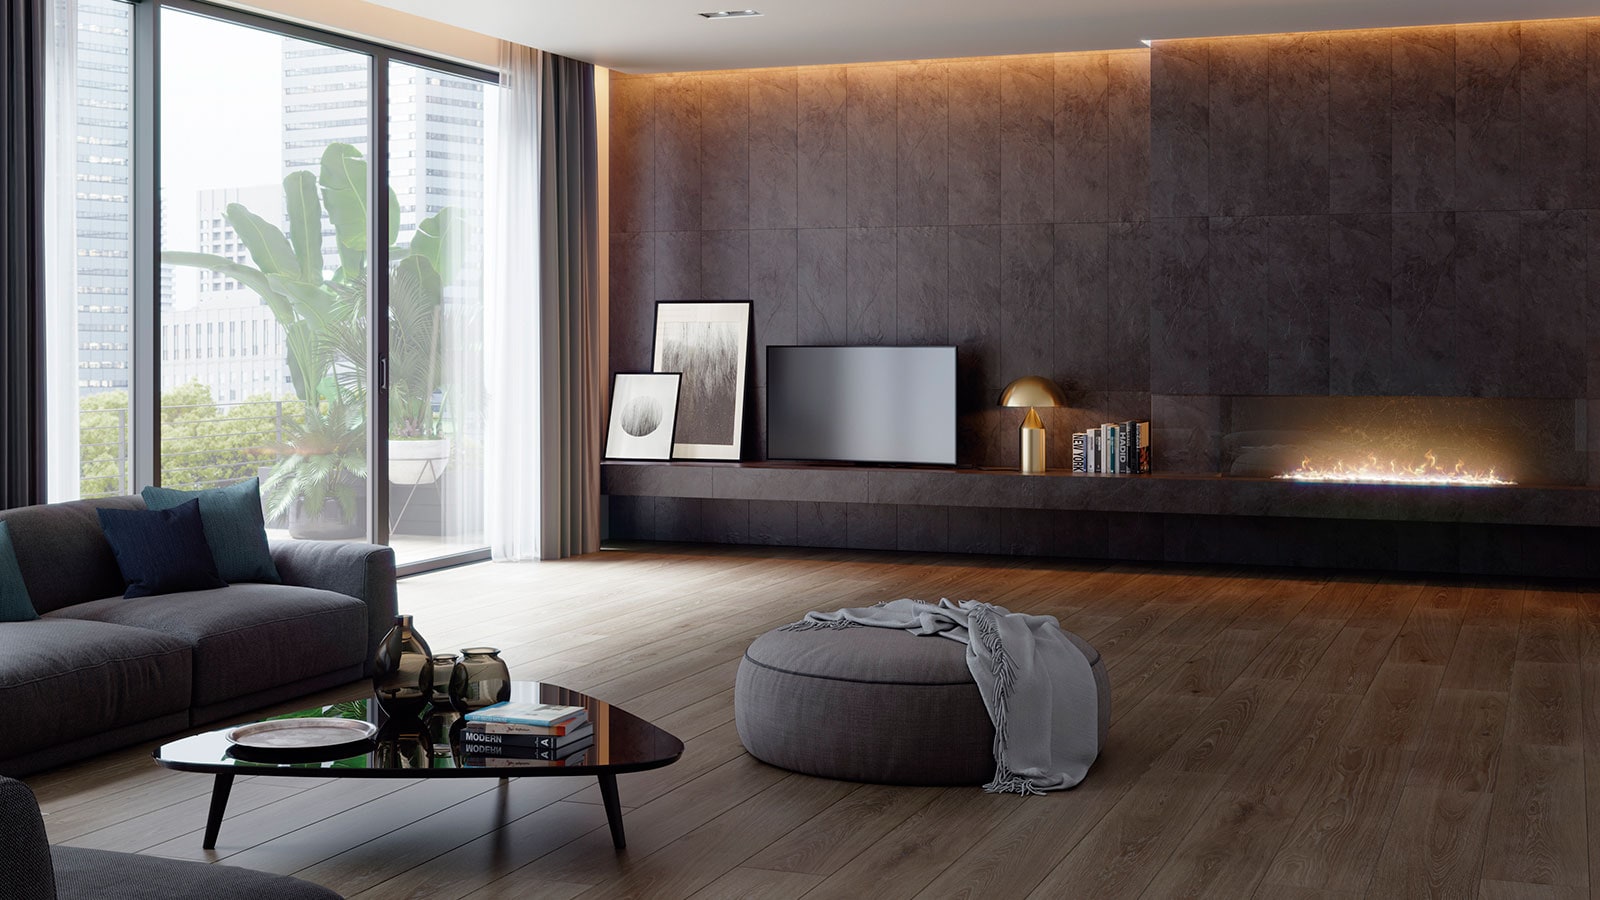 Porcelanosa modernises the use of slate in its "Image" collection